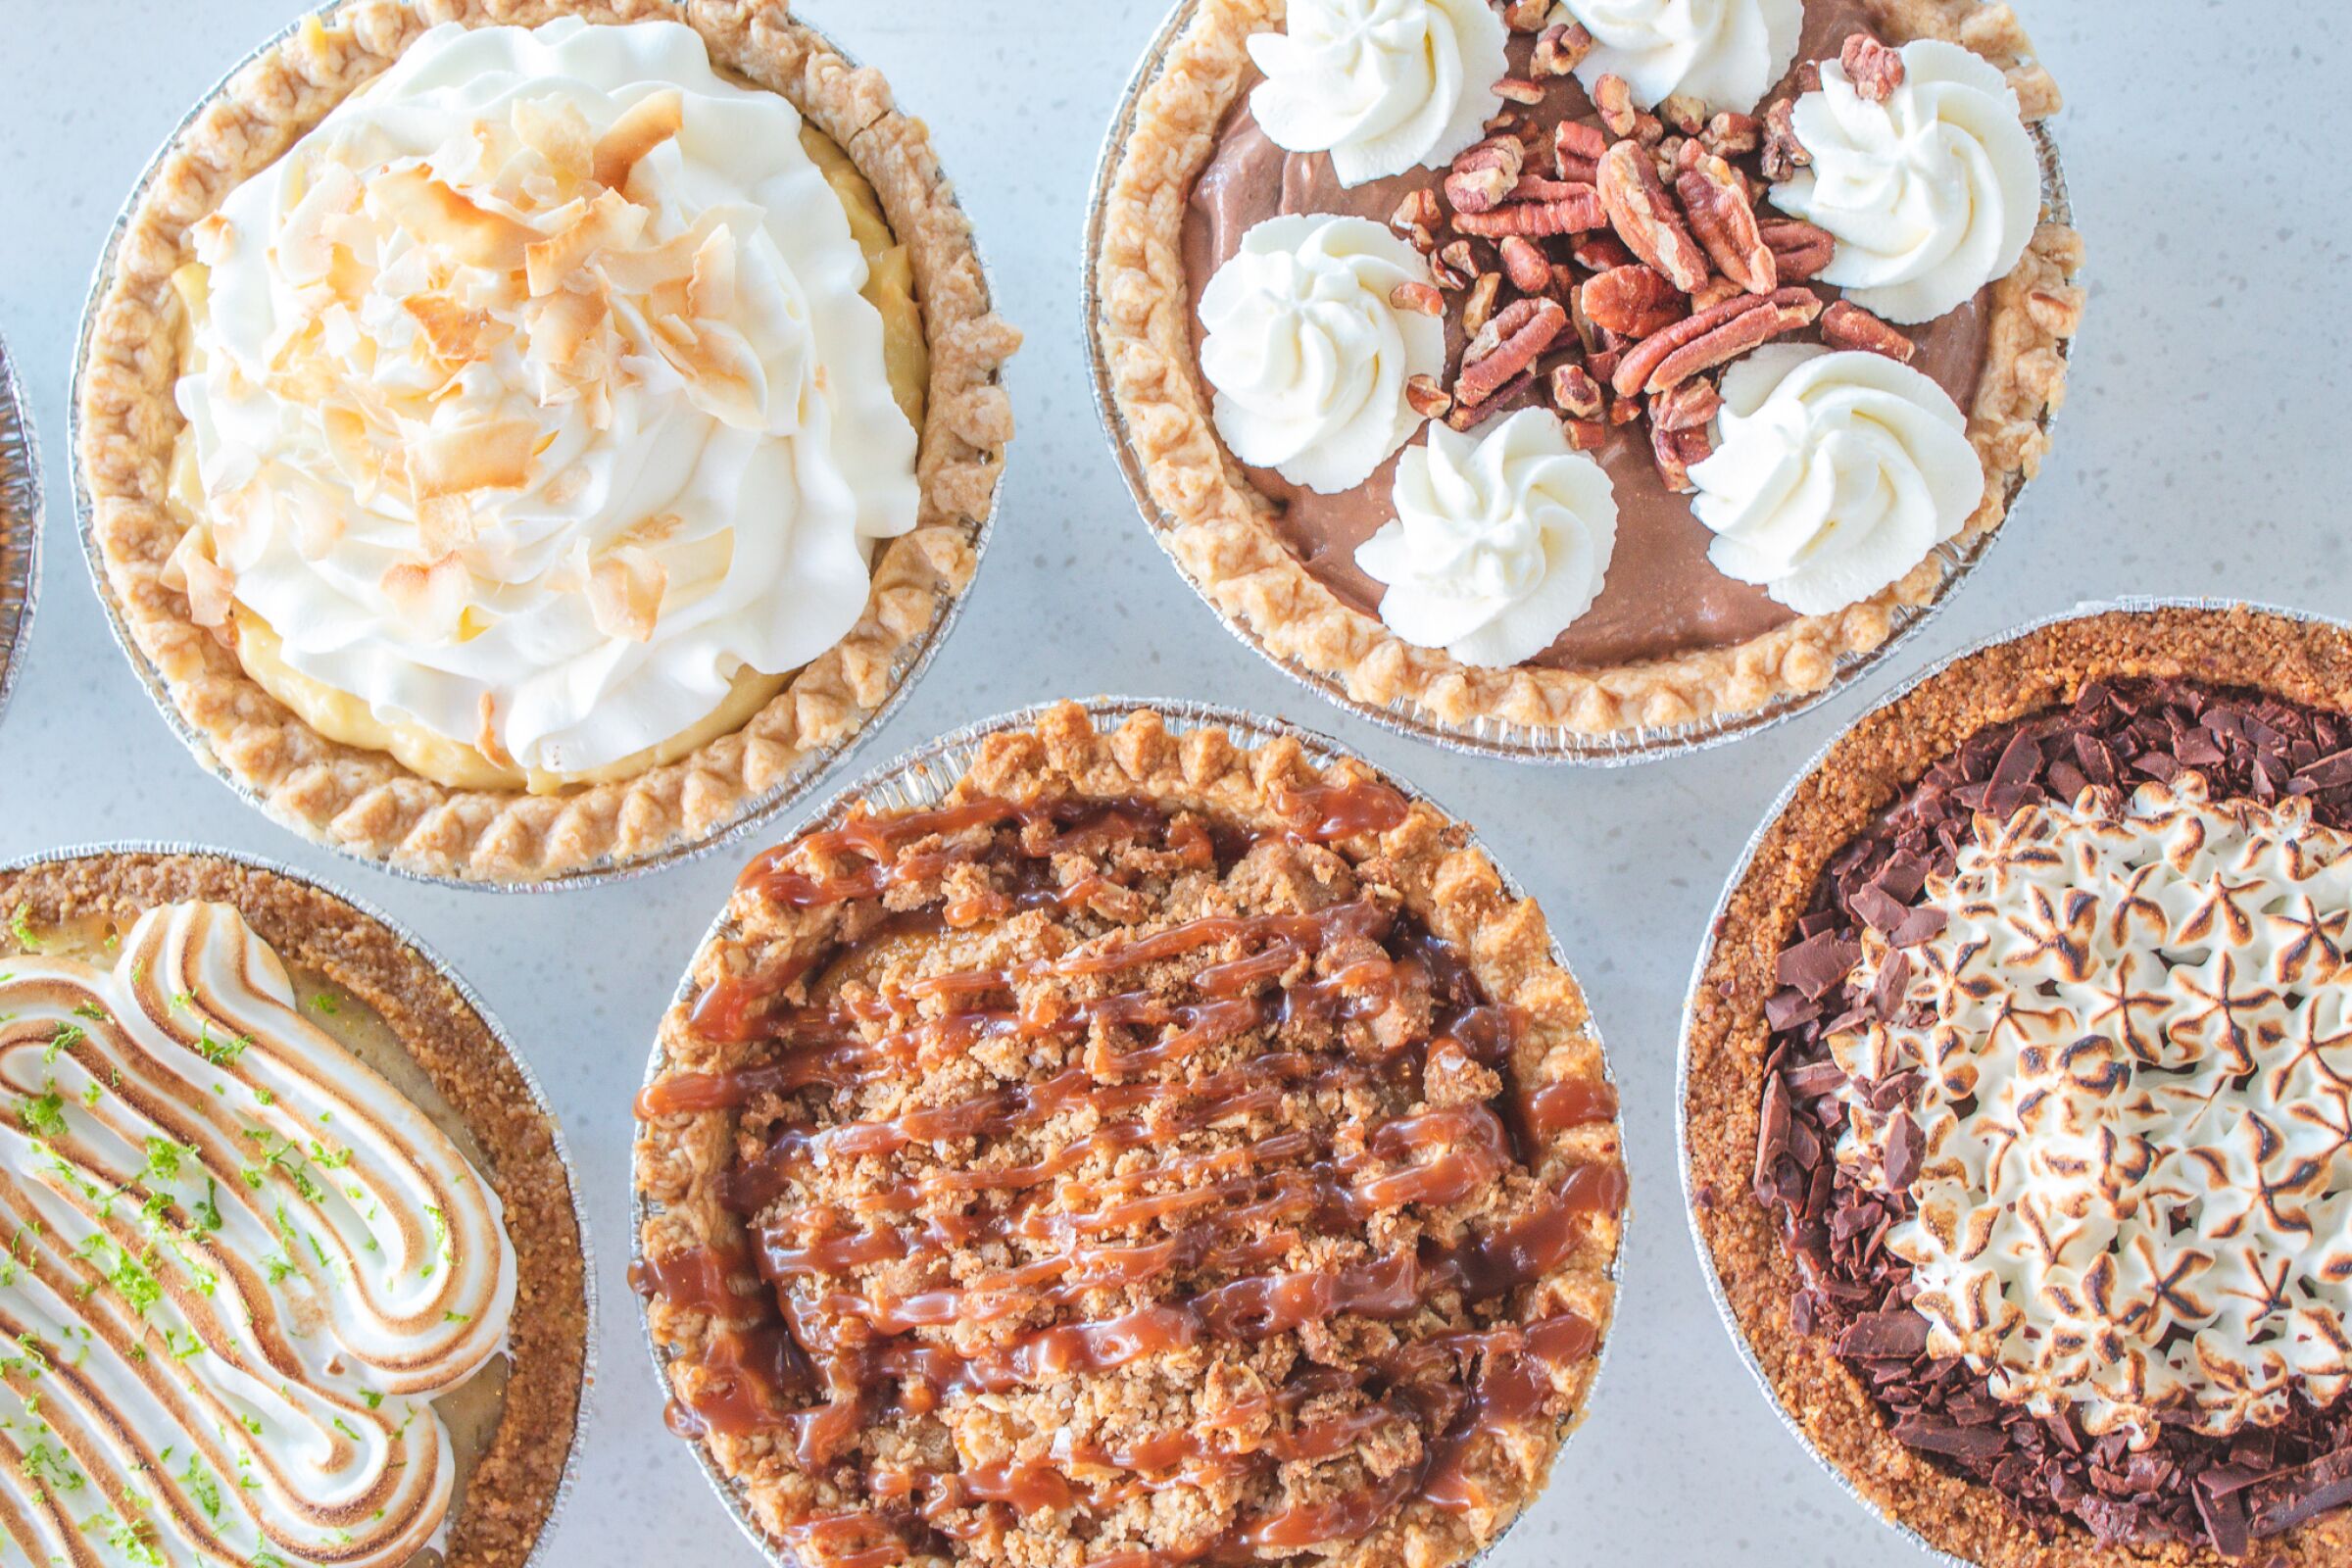 Pacific Social will offer a selection of pie flavors on Pi Day.